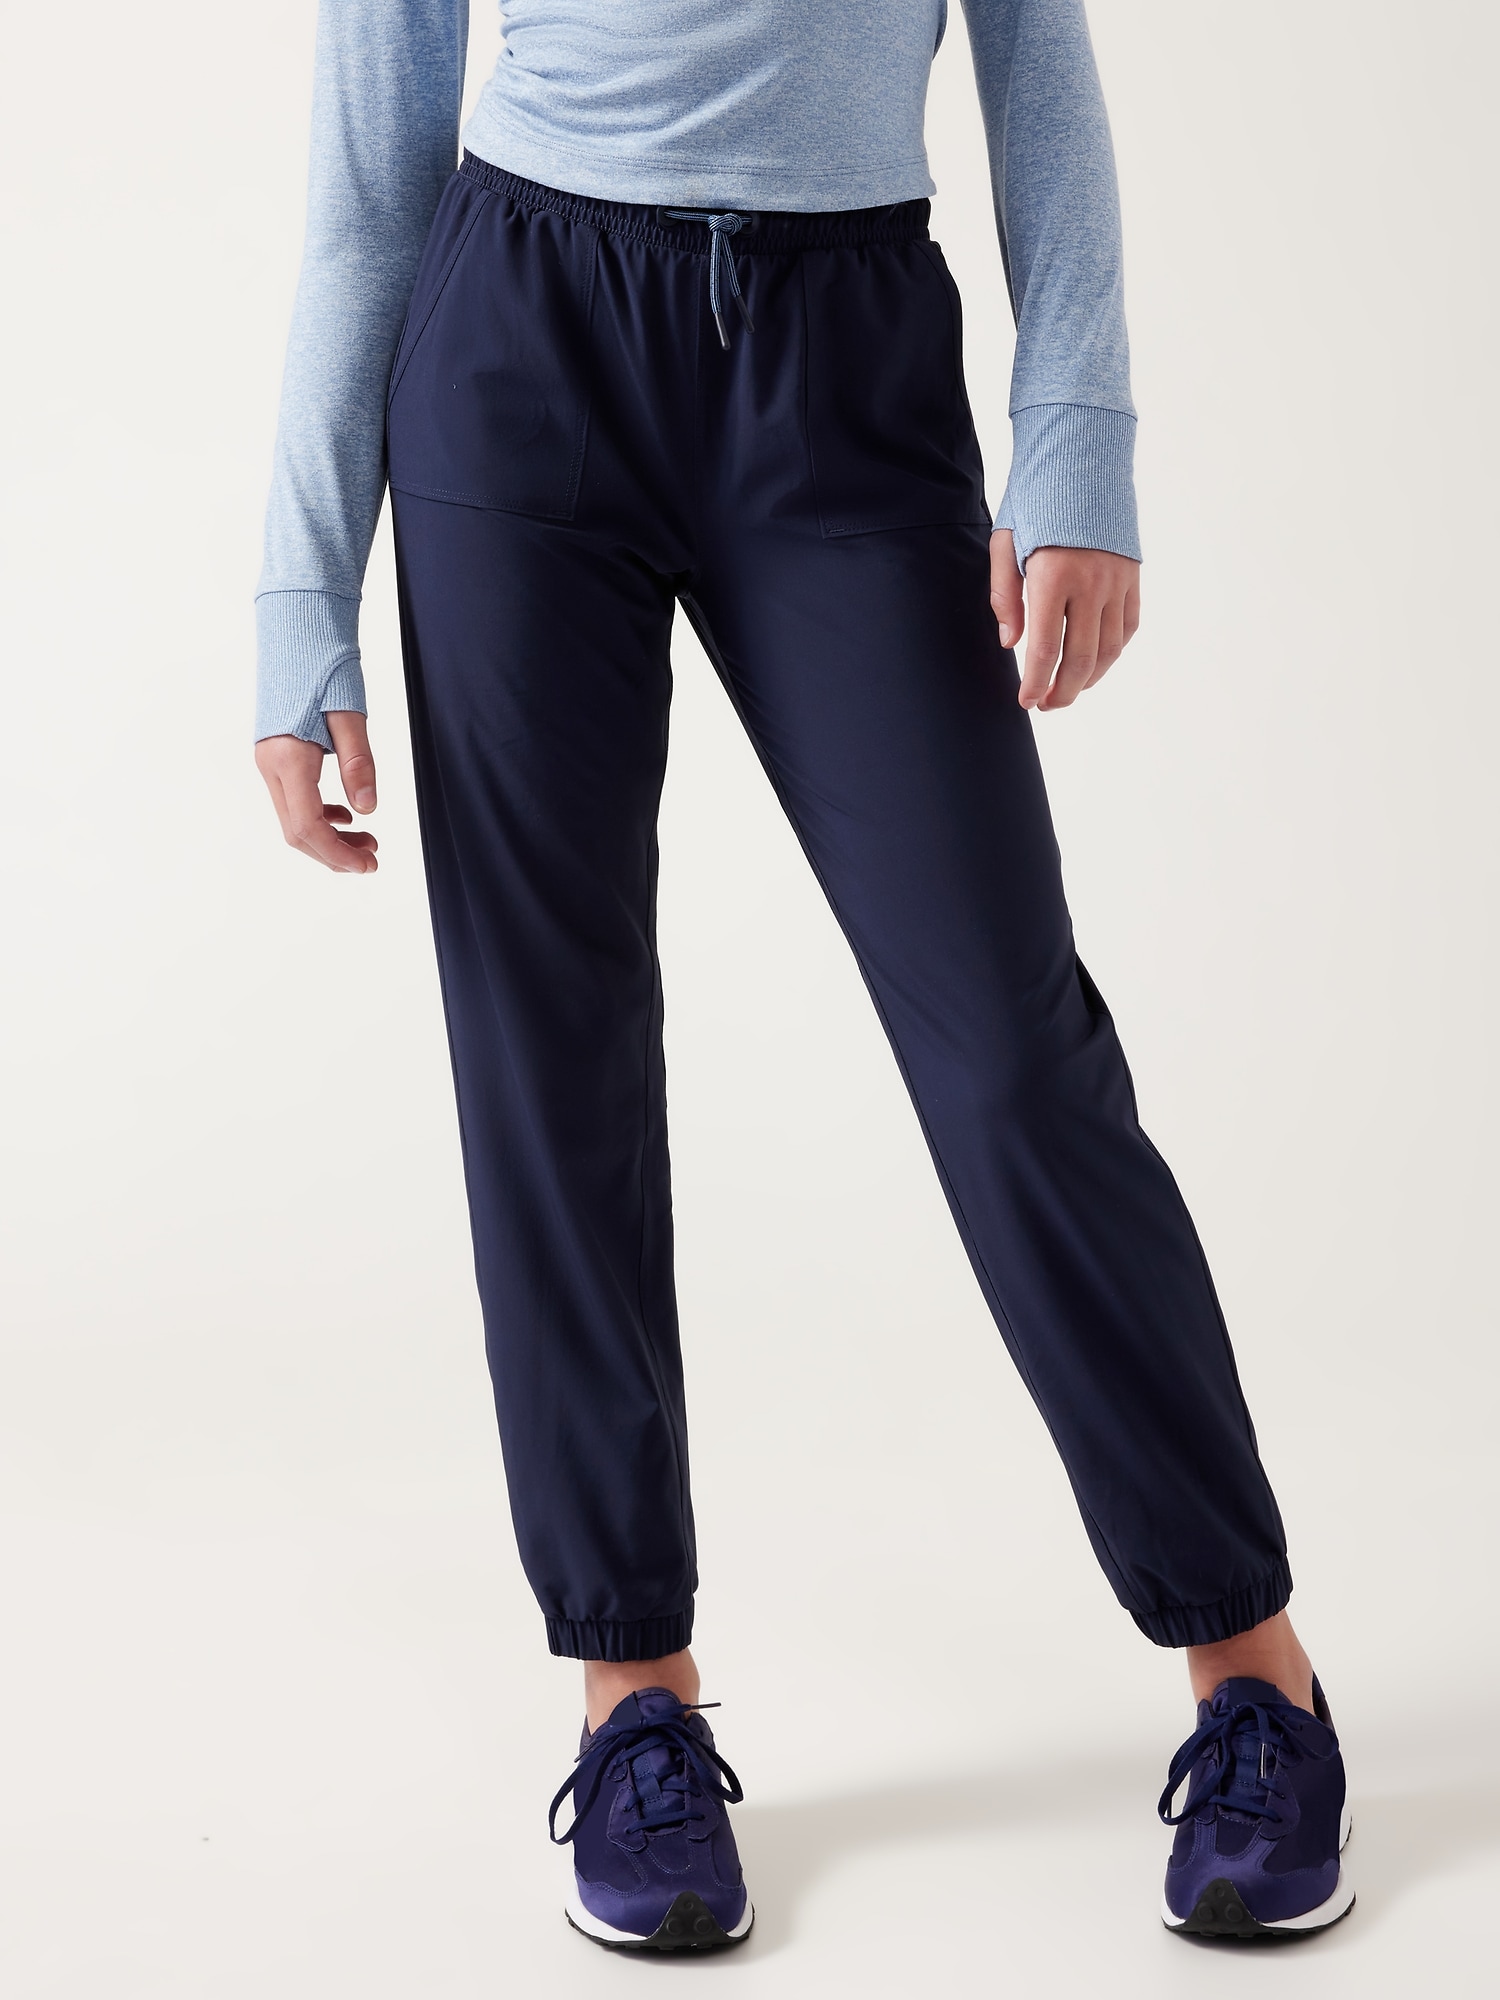 Athleta Lined Athletic Pants for Women